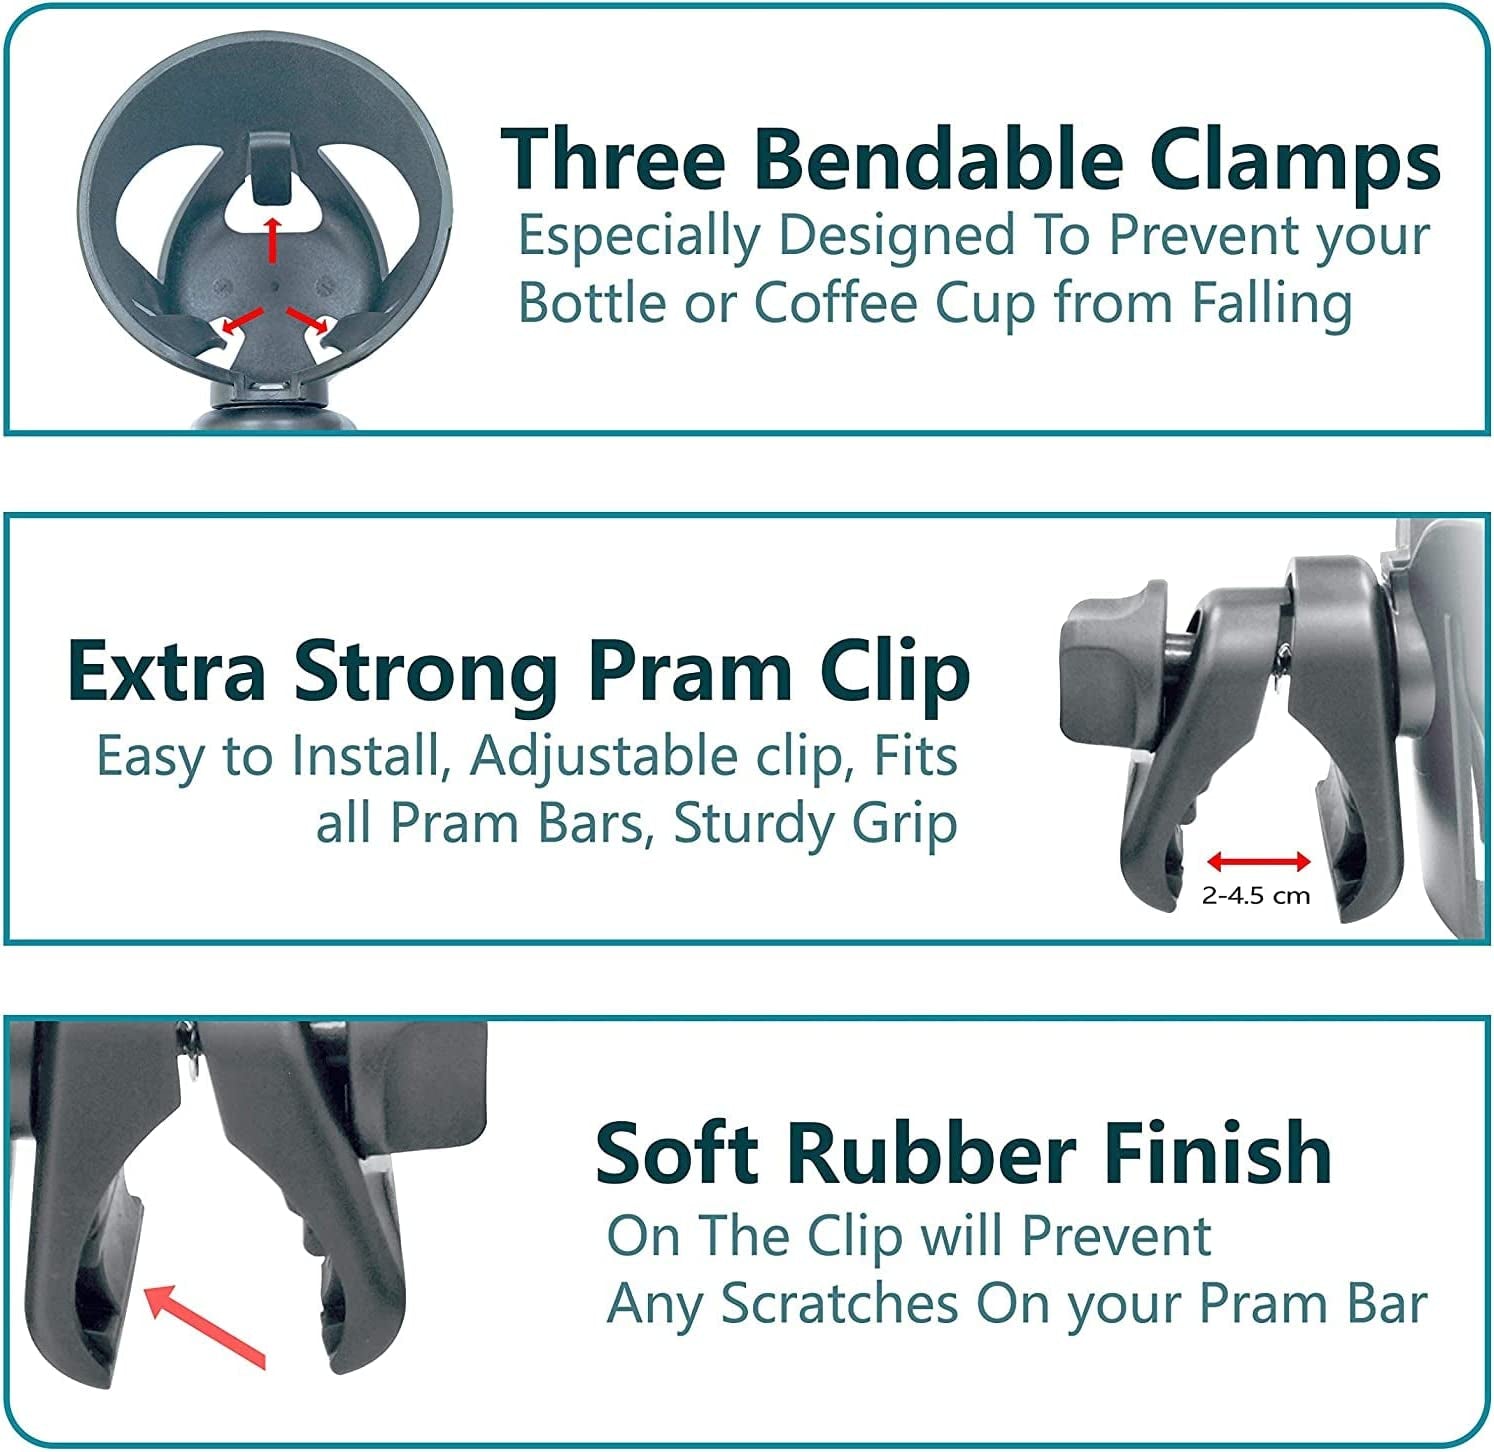 Pram Cup Holder, Pushchair/Stroller Cup Holder, Universal Baby Bottle Pram Organiser, Drink and Coffee Cup Holder, with 2 Pram Hooks, Can Be Used for Baby Buggy, Bike and Wheelchair